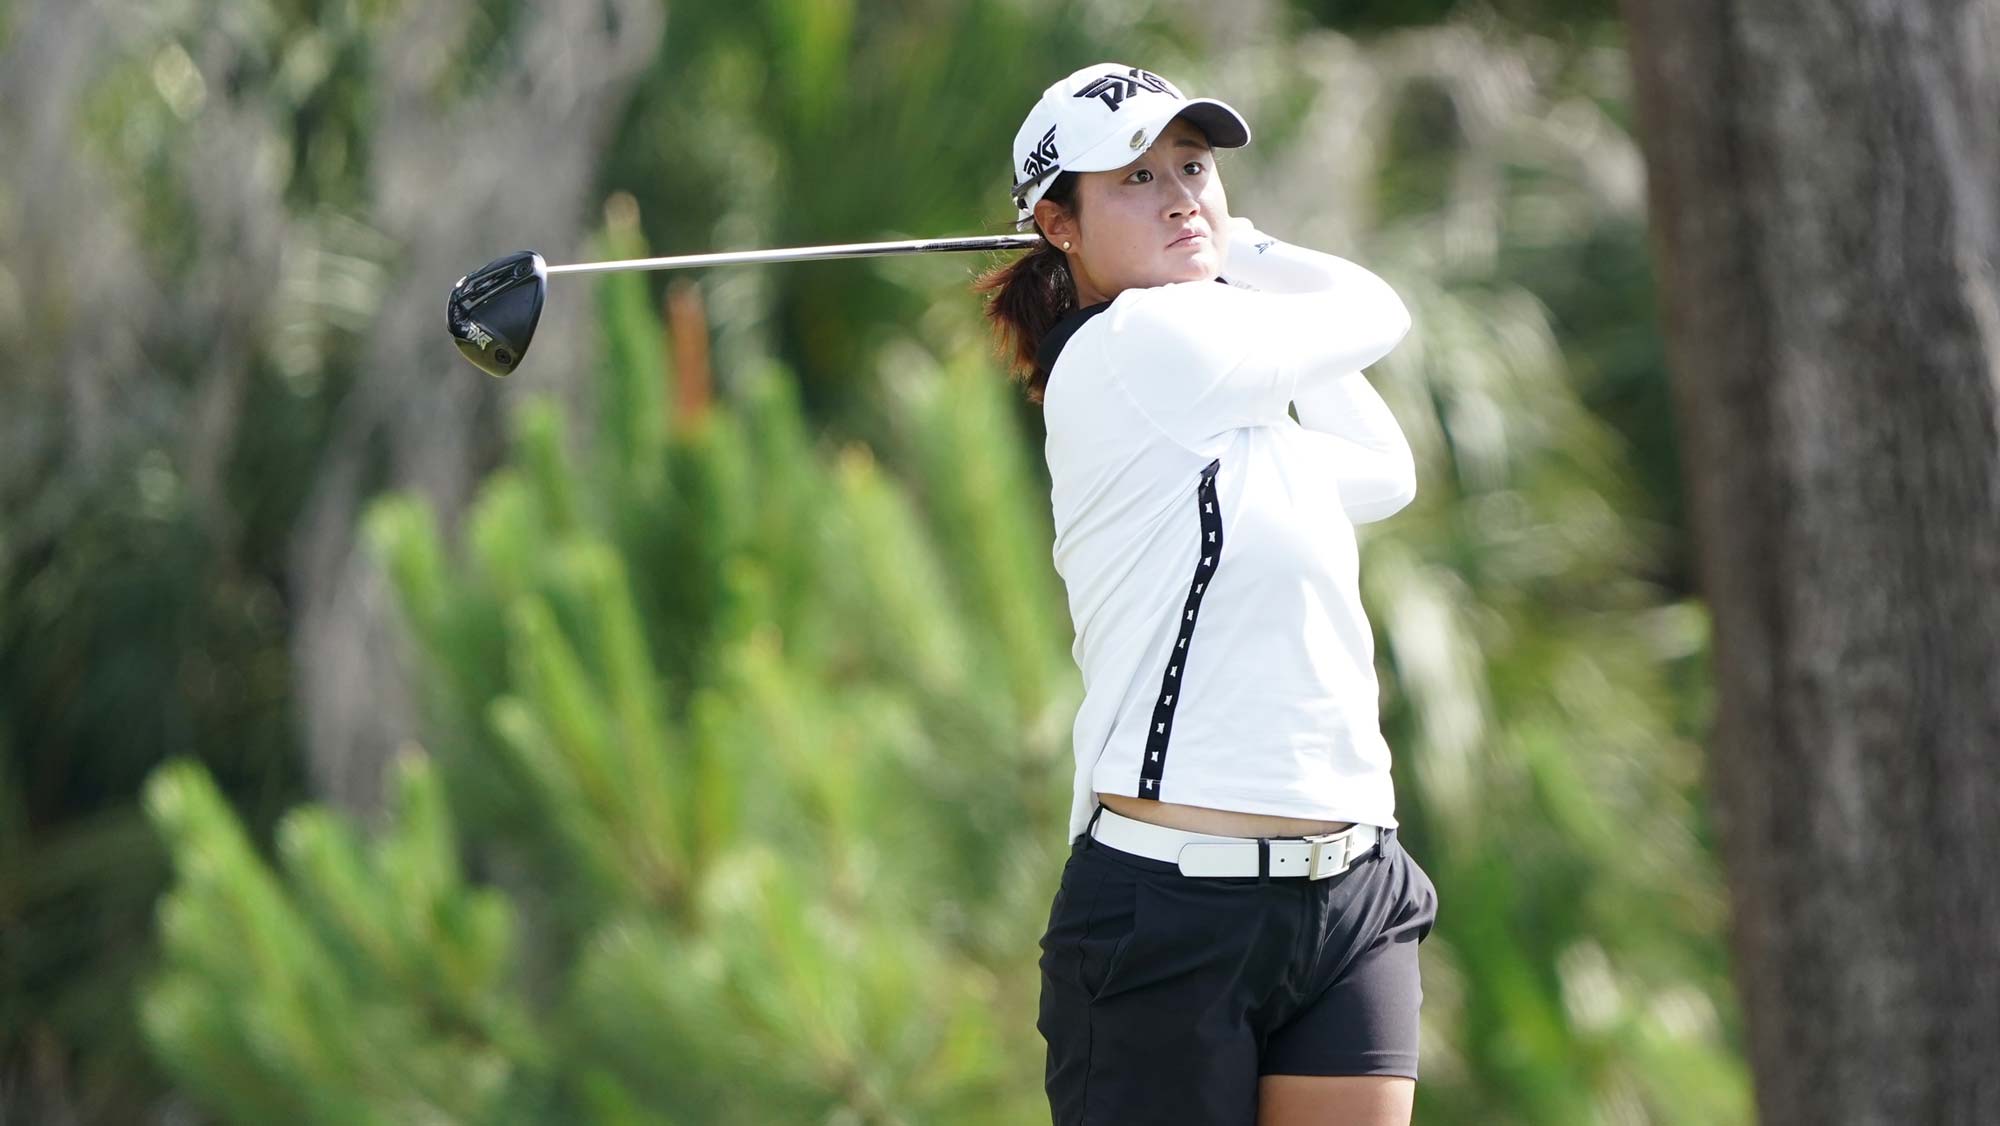 Gina Kim during the opening round of the Inova Mission Inn Resort and Club Championship